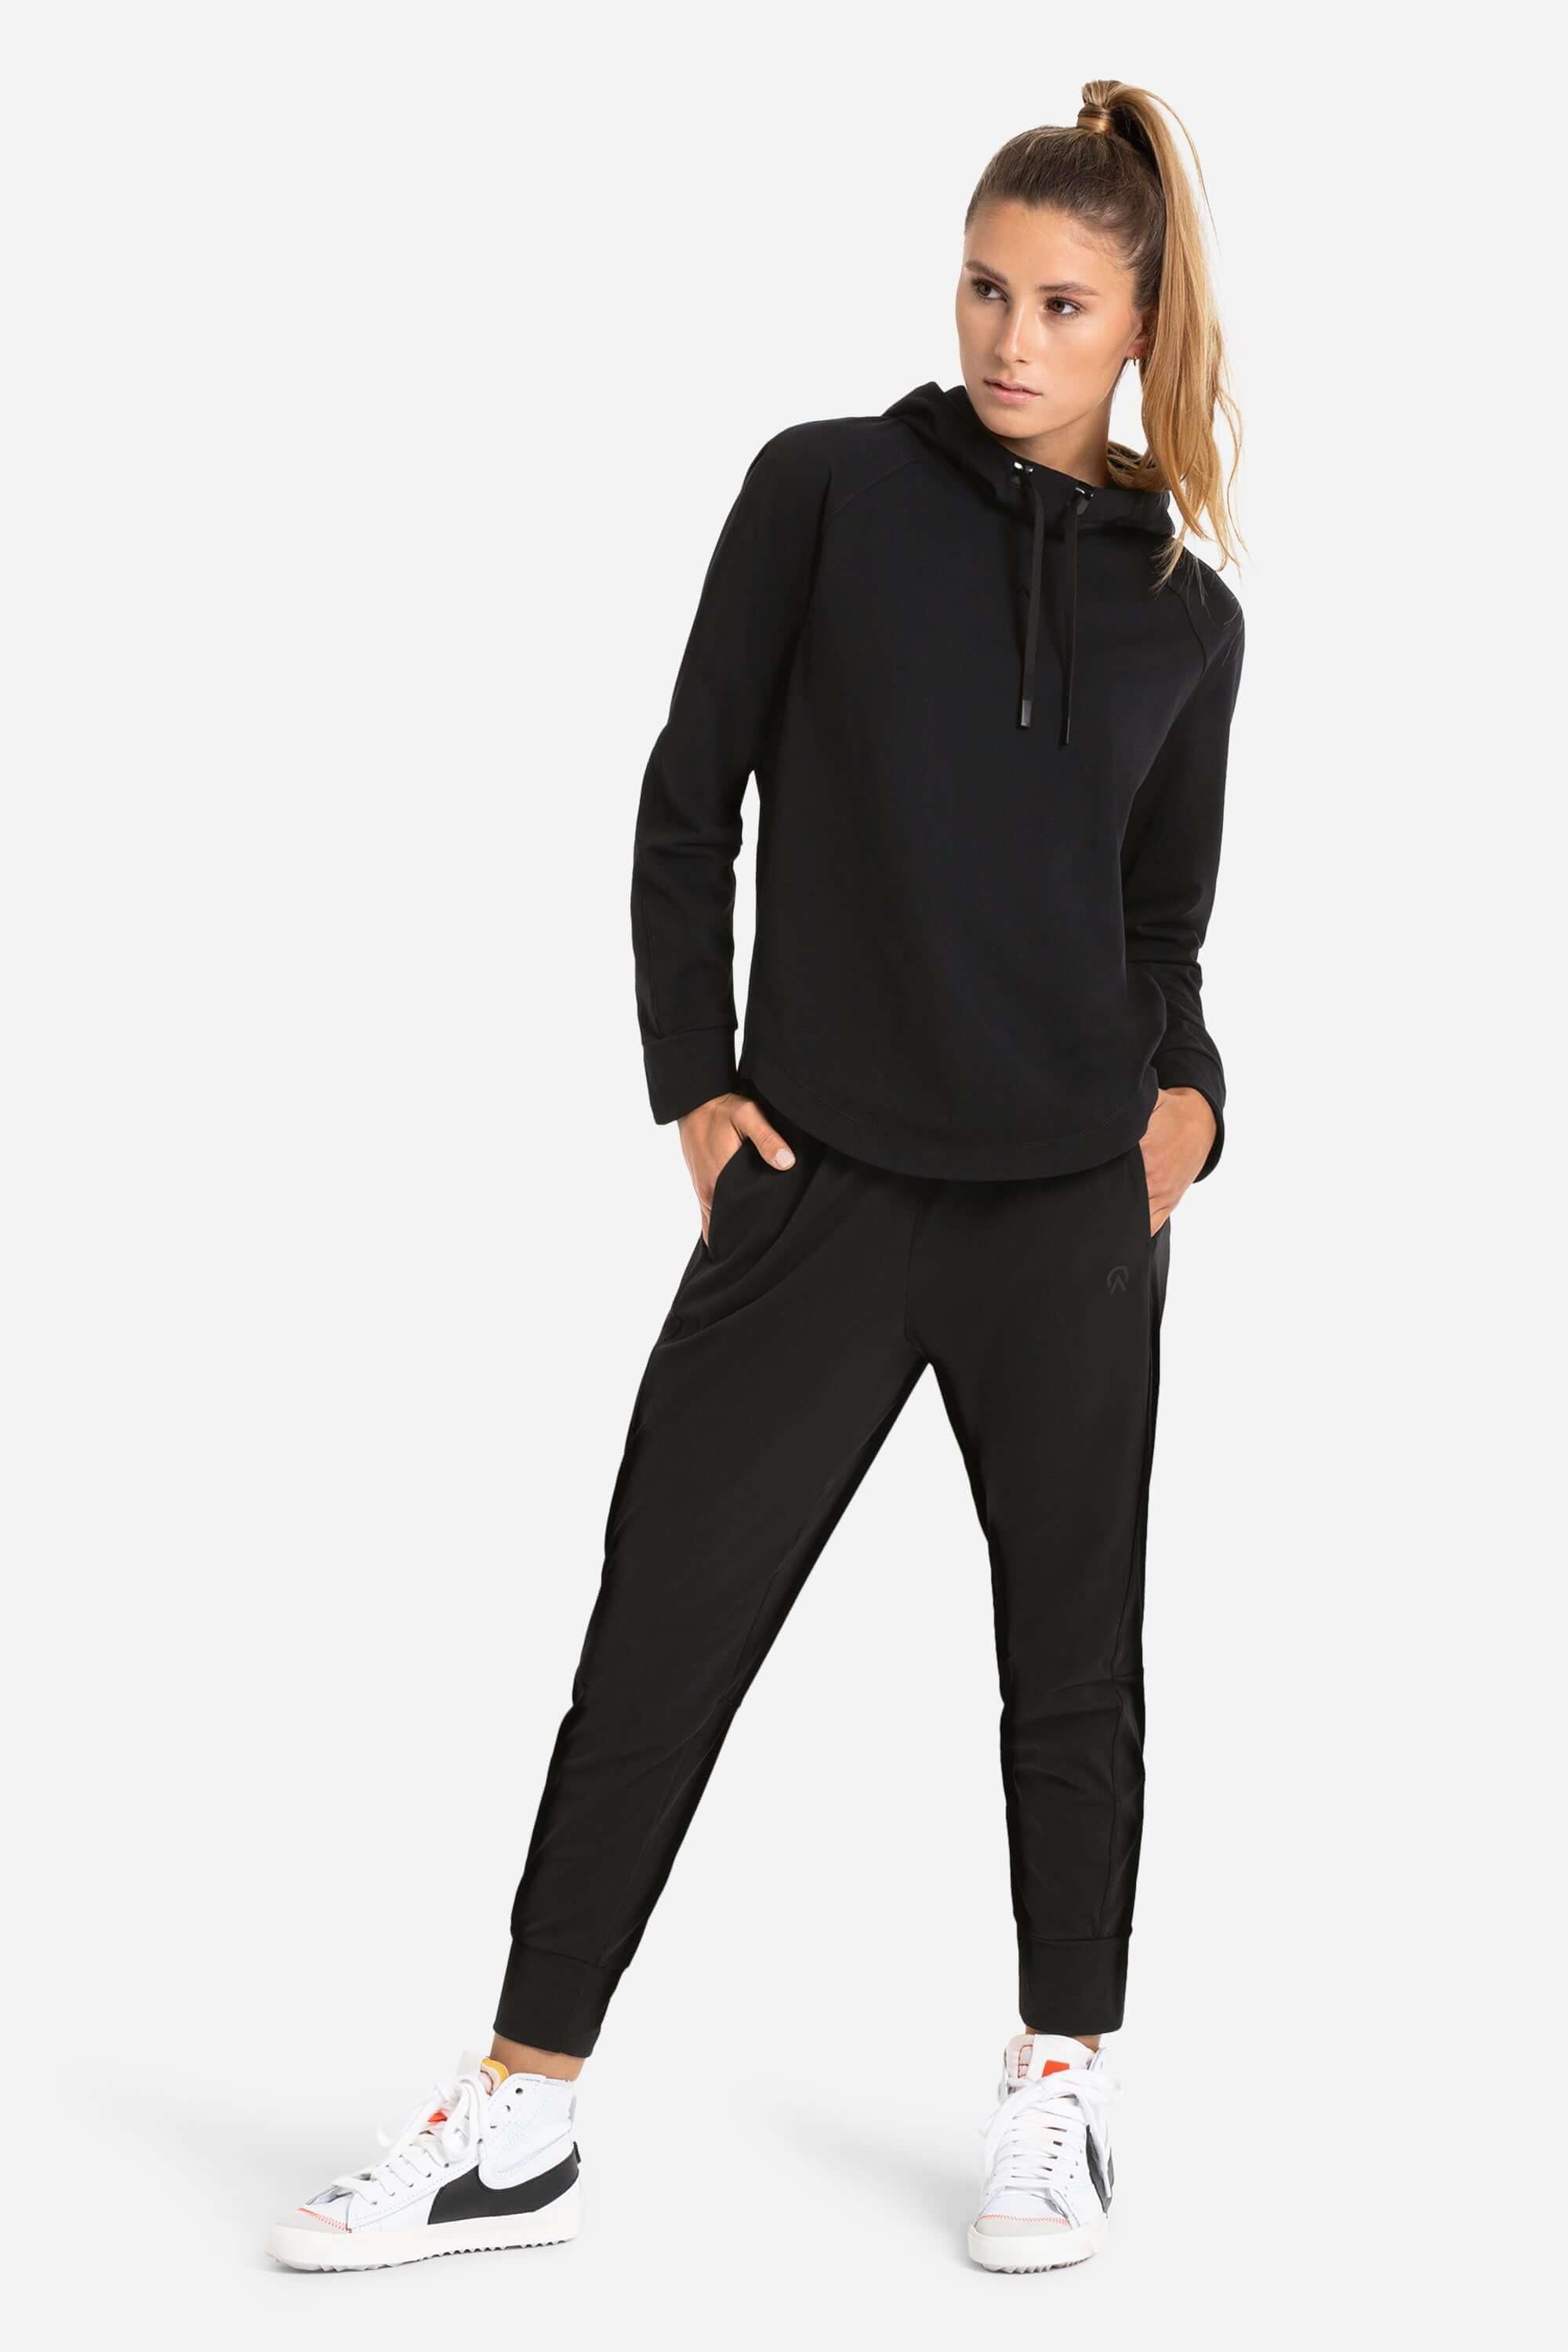 Women in a black workout hoodie and black joggers